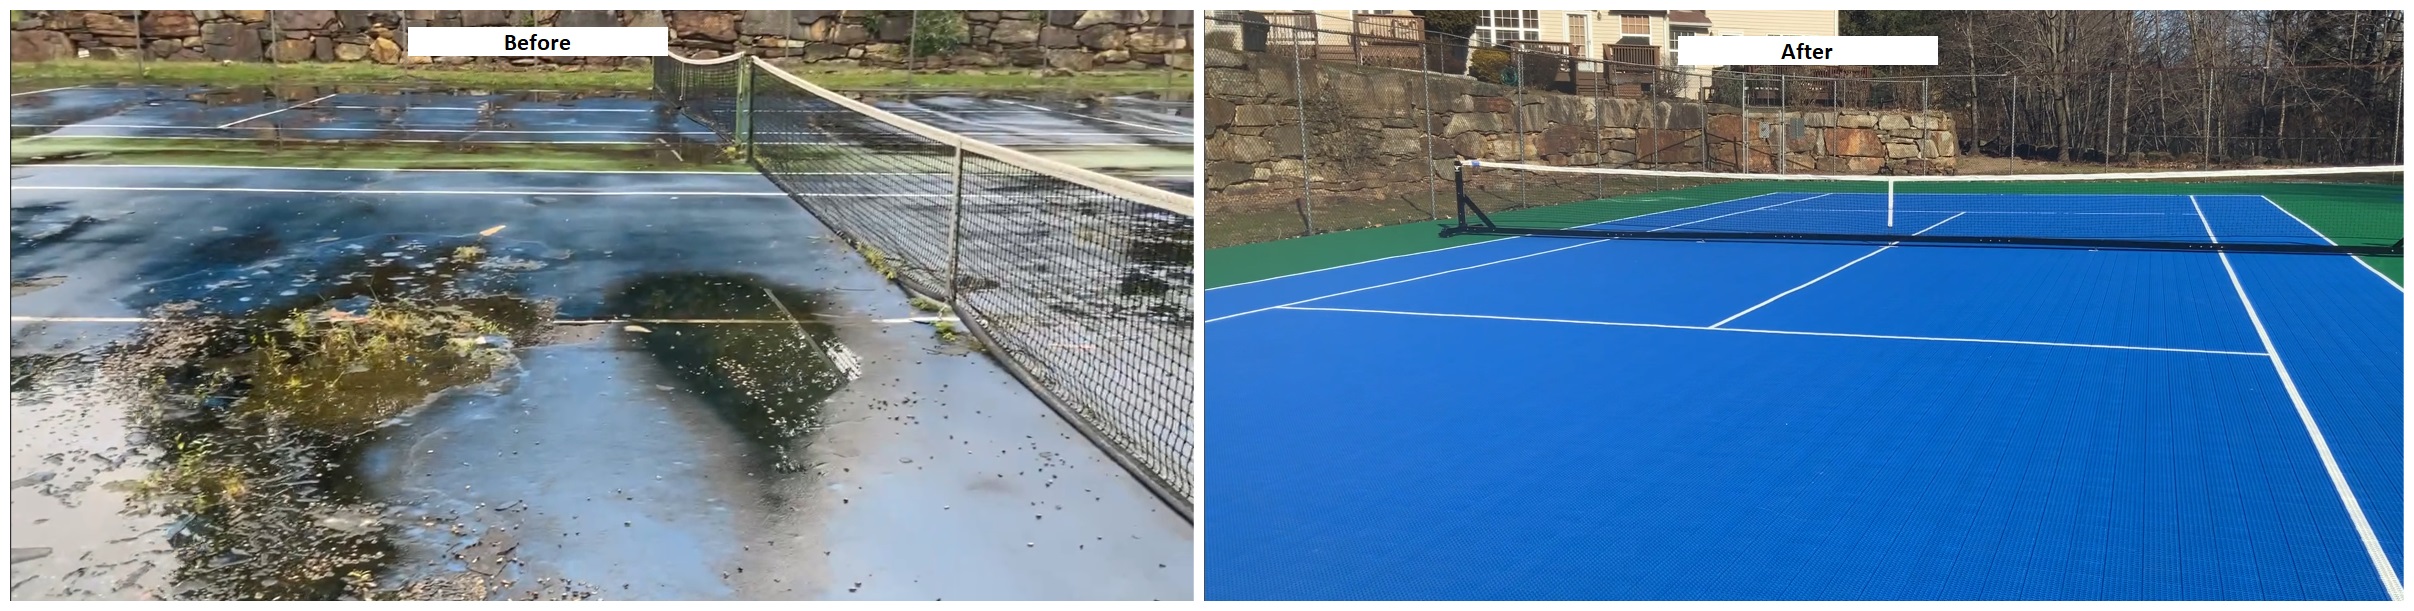 Tennis-Court-Renovation-Before+After_DeShayes-Court-Conversions